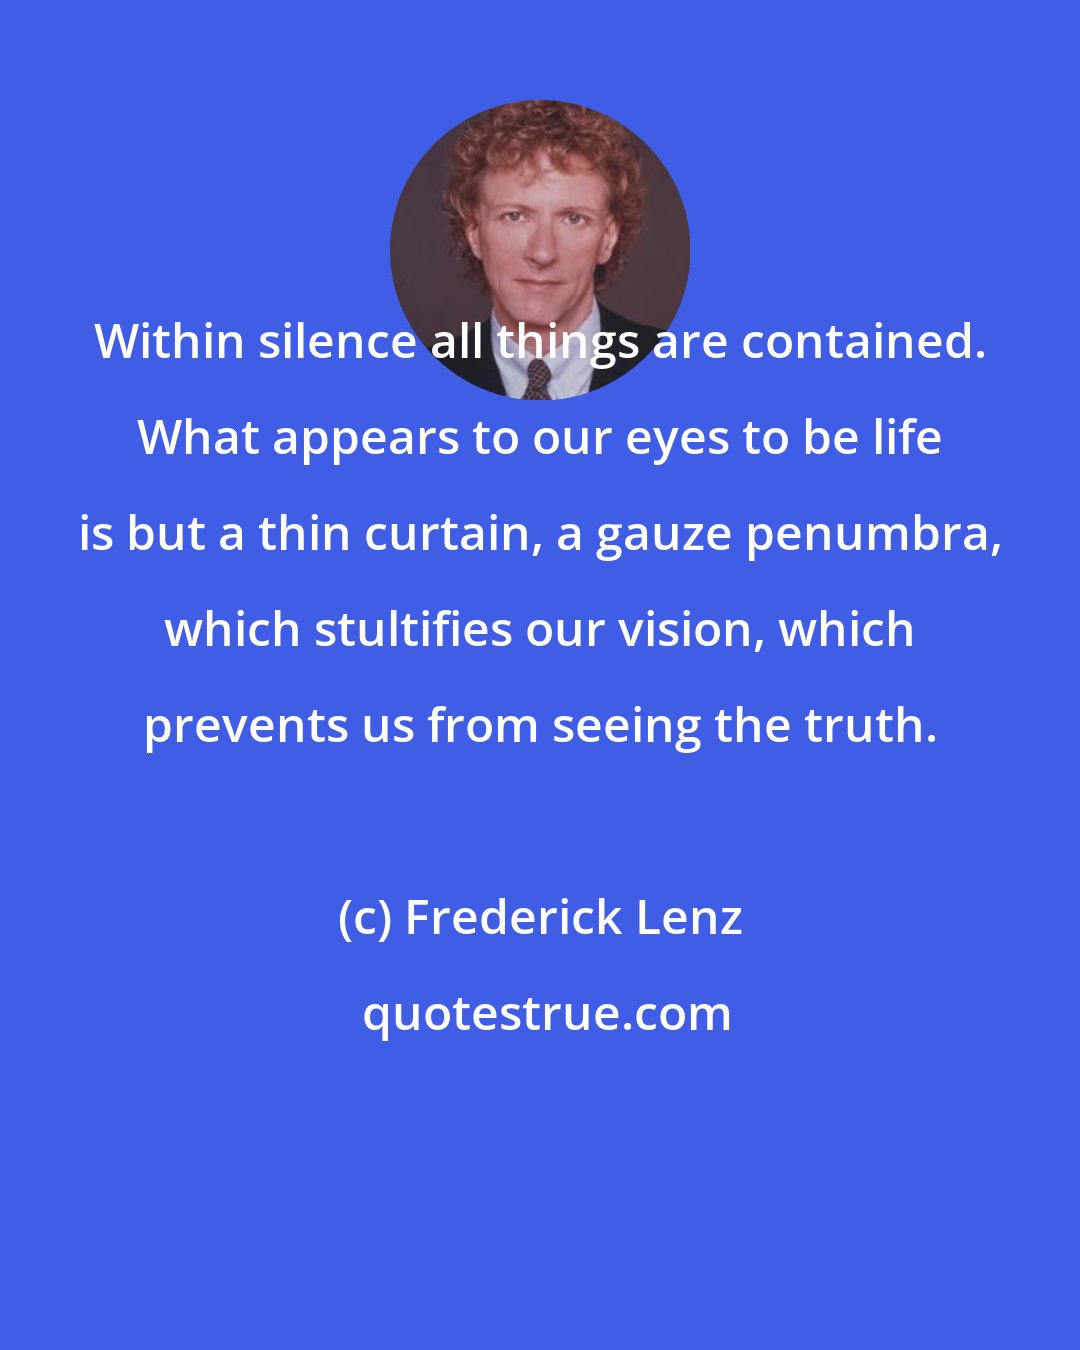 Frederick Lenz: Within silence all things are contained. What appears to our eyes to be life is but a thin curtain, a gauze penumbra, which stultifies our vision, which prevents us from seeing the truth.